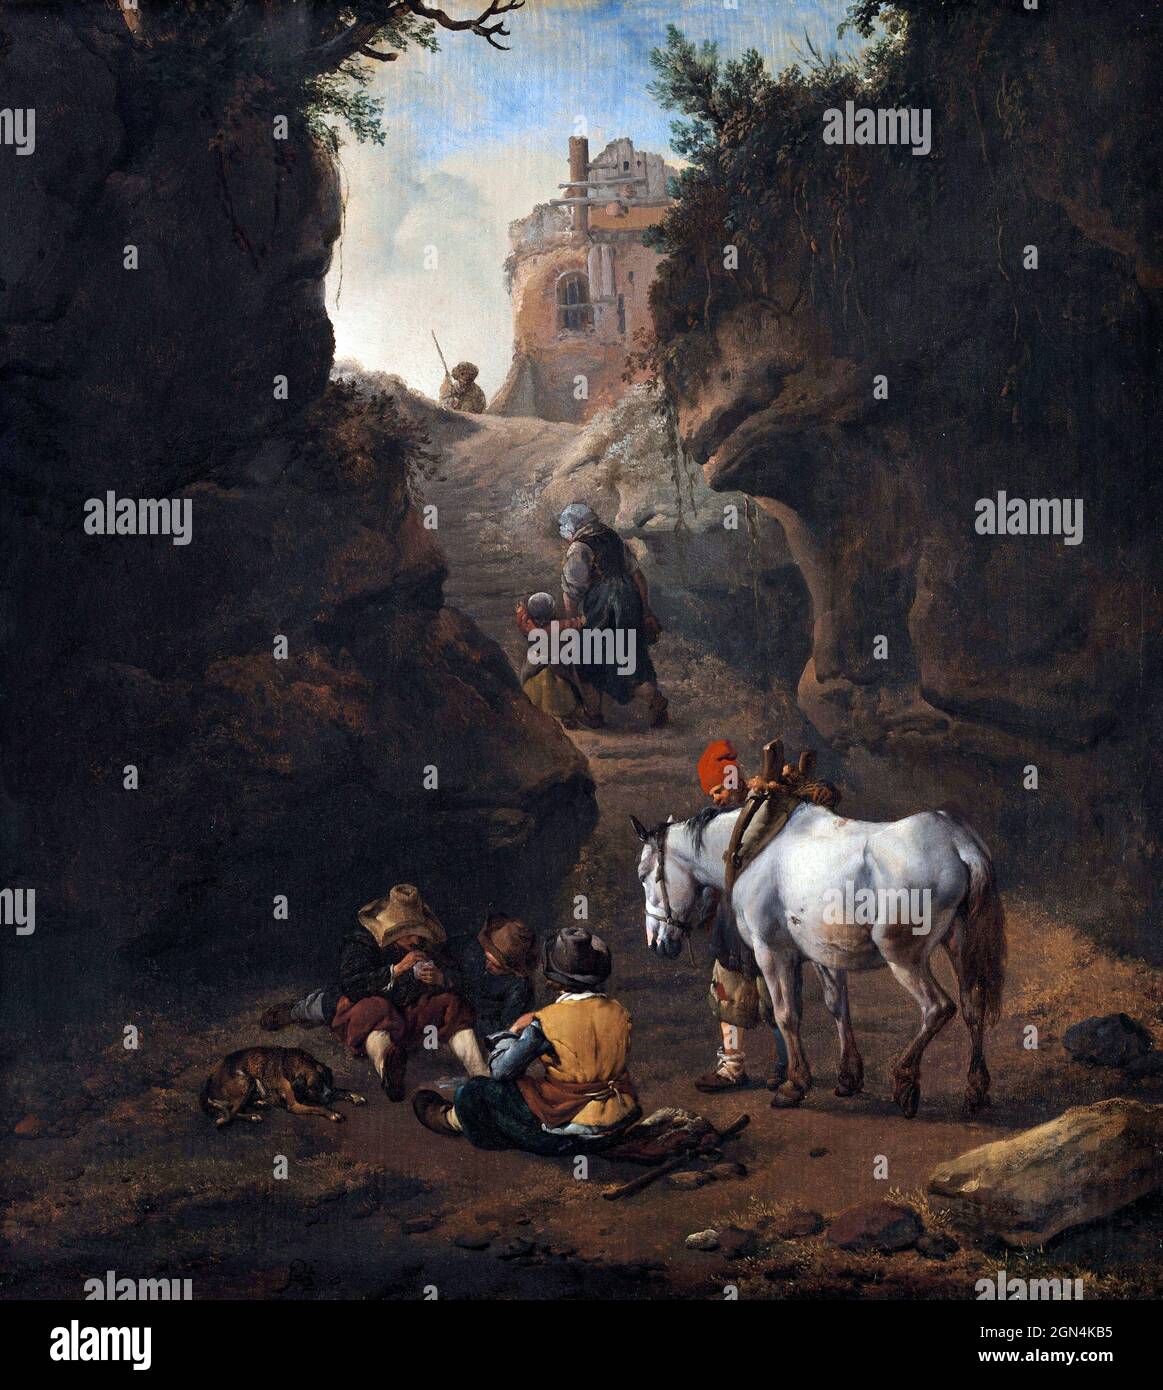 Peasants Playing Cards by a White Horse by the Dutch artist, Philips Wouwerman (1619-1668) Stock Photo